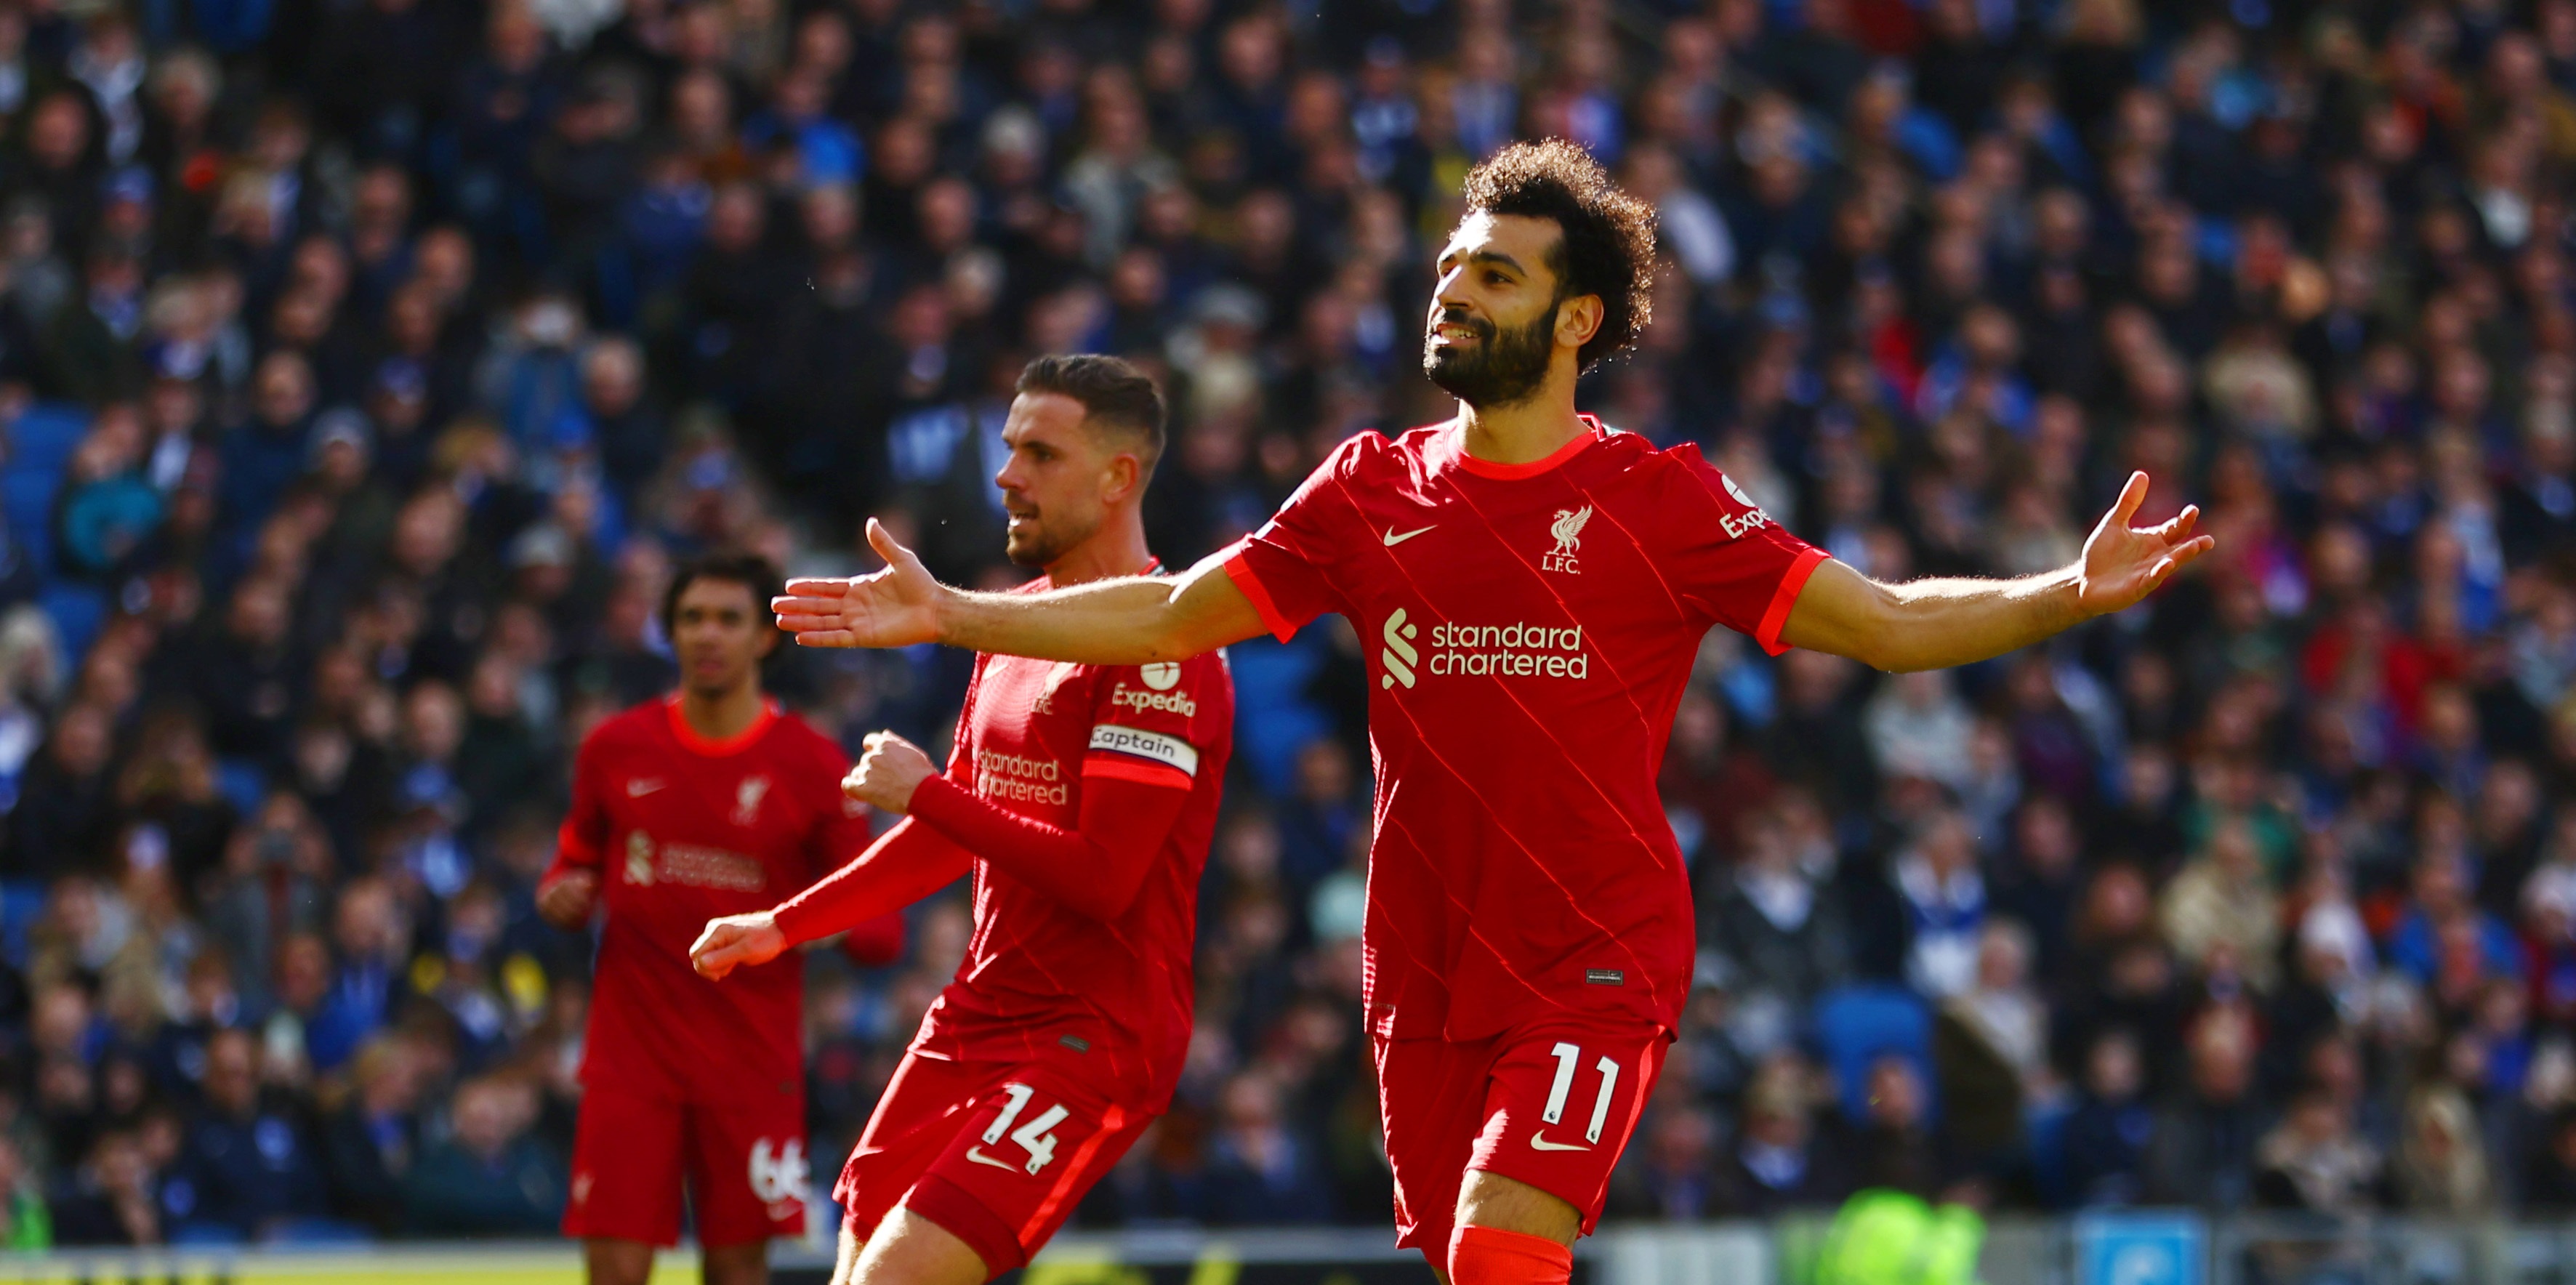 ‘Not with a crazy salary’ – Romano insists Salah is happy at Liverpool but is demanding an ‘important contract’ that reflects his importance to Jurgen Klopp’s side